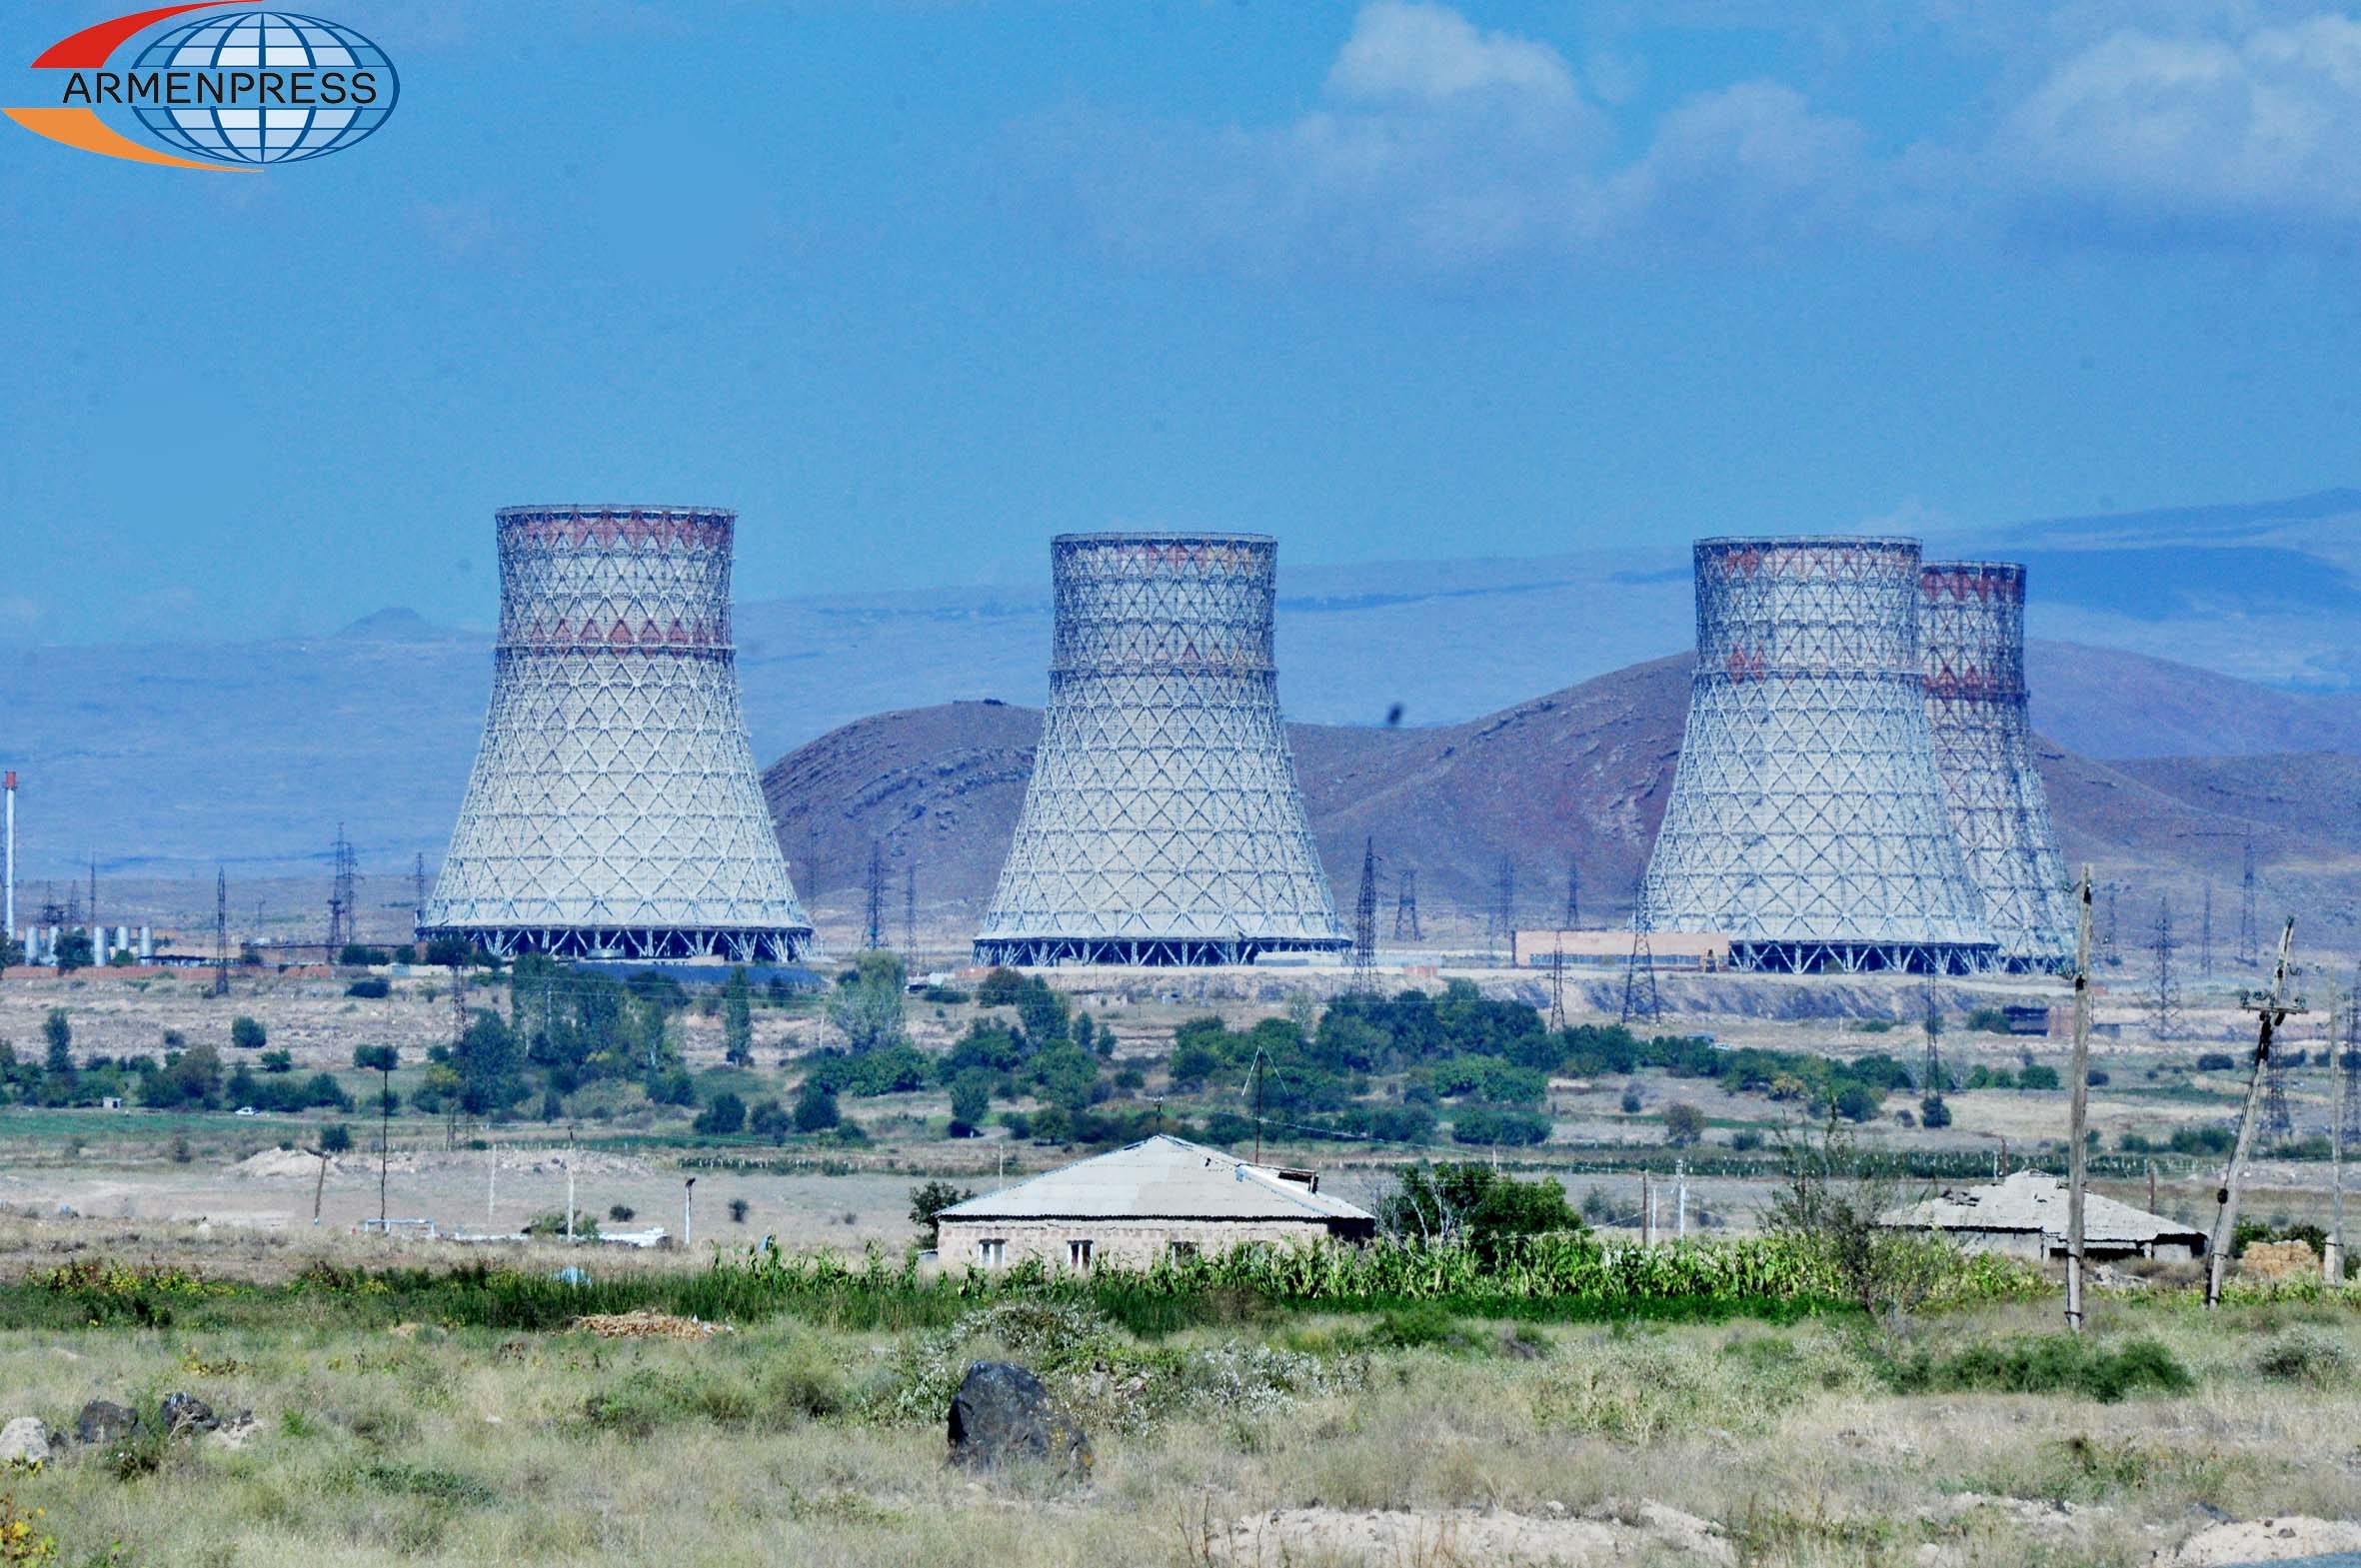 Russia provides credit of USD 270 million for extension of Armenian NPP's exploitation